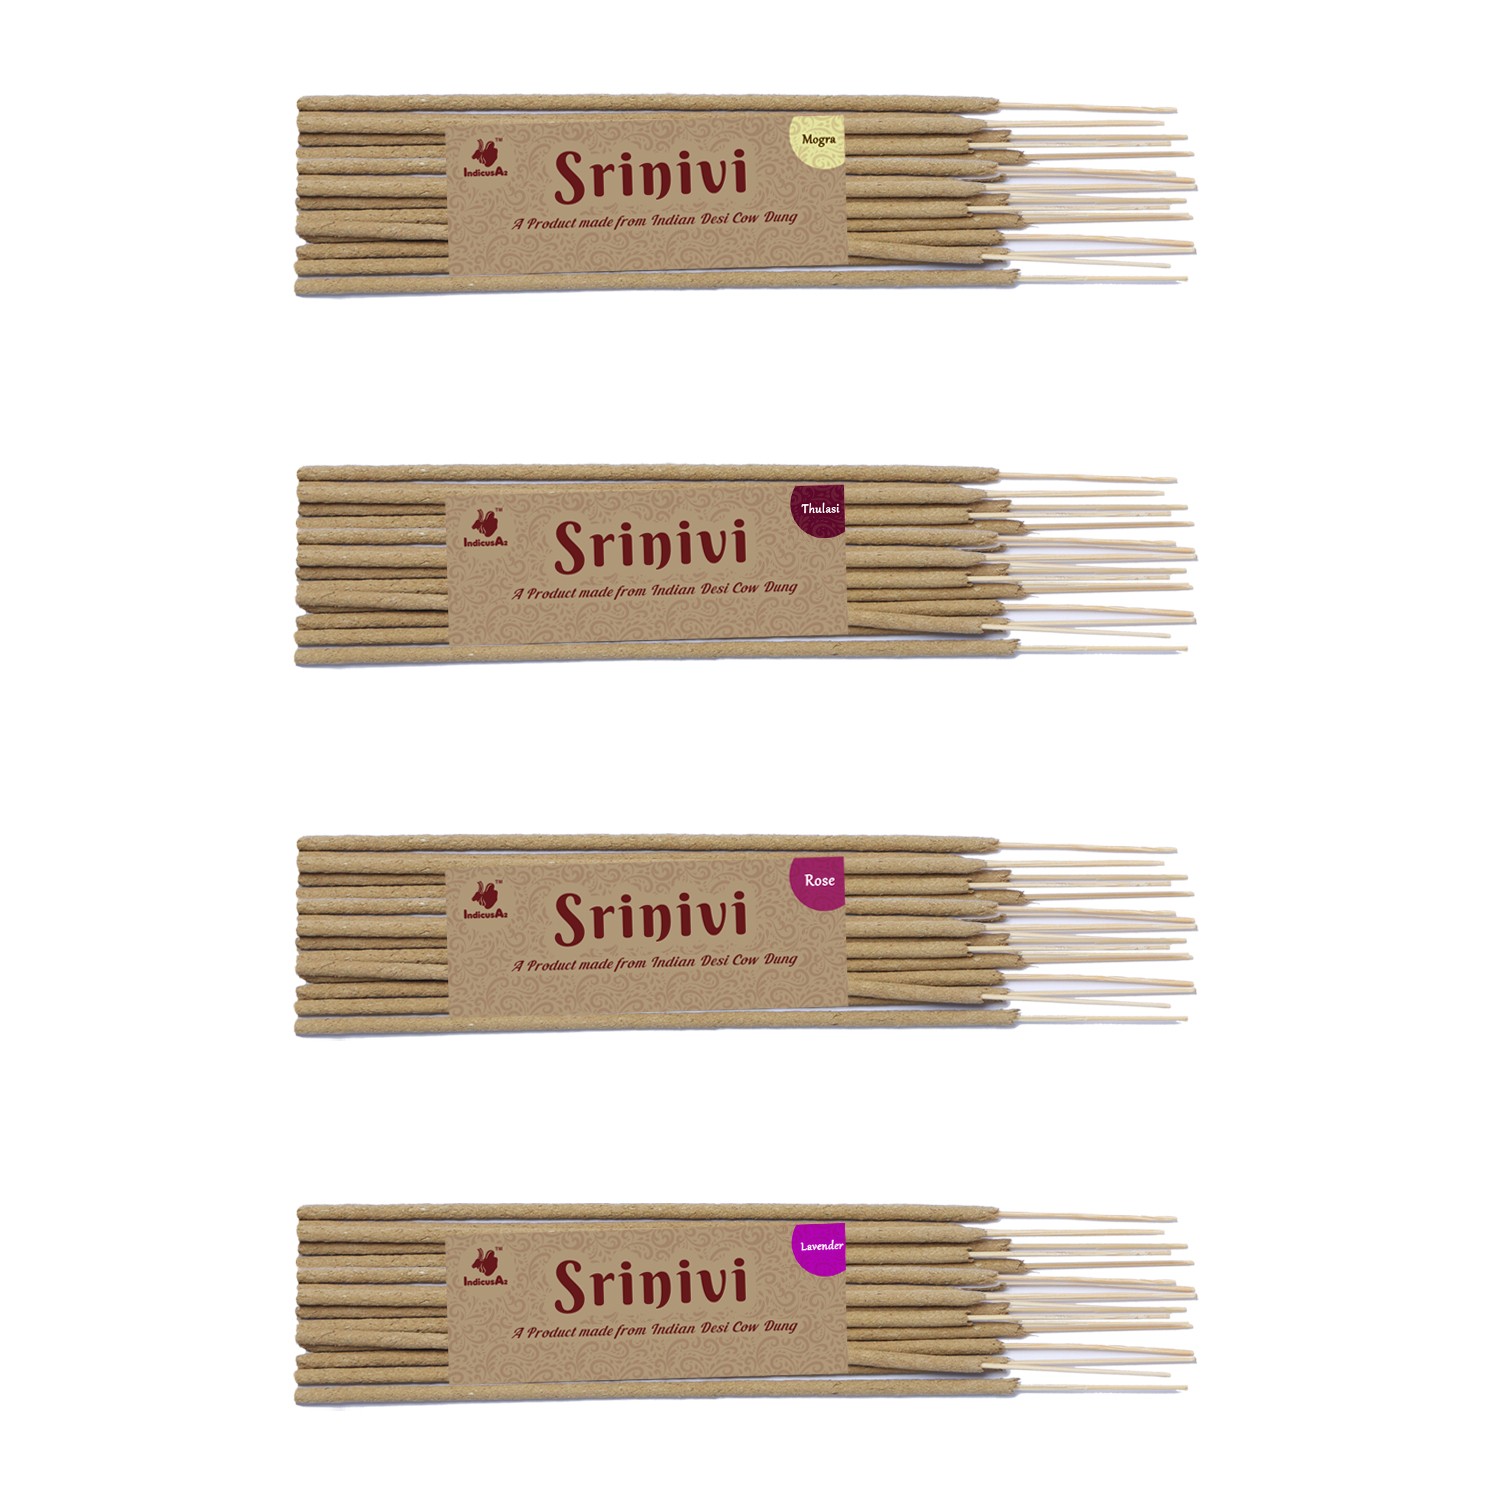 Srinivi Agarbattis - Made up of desi cow dung|Pack of 4|Each pack consists of 18 sticks|Fragrance - Mogra, Rose, Thulasi, Lavender.